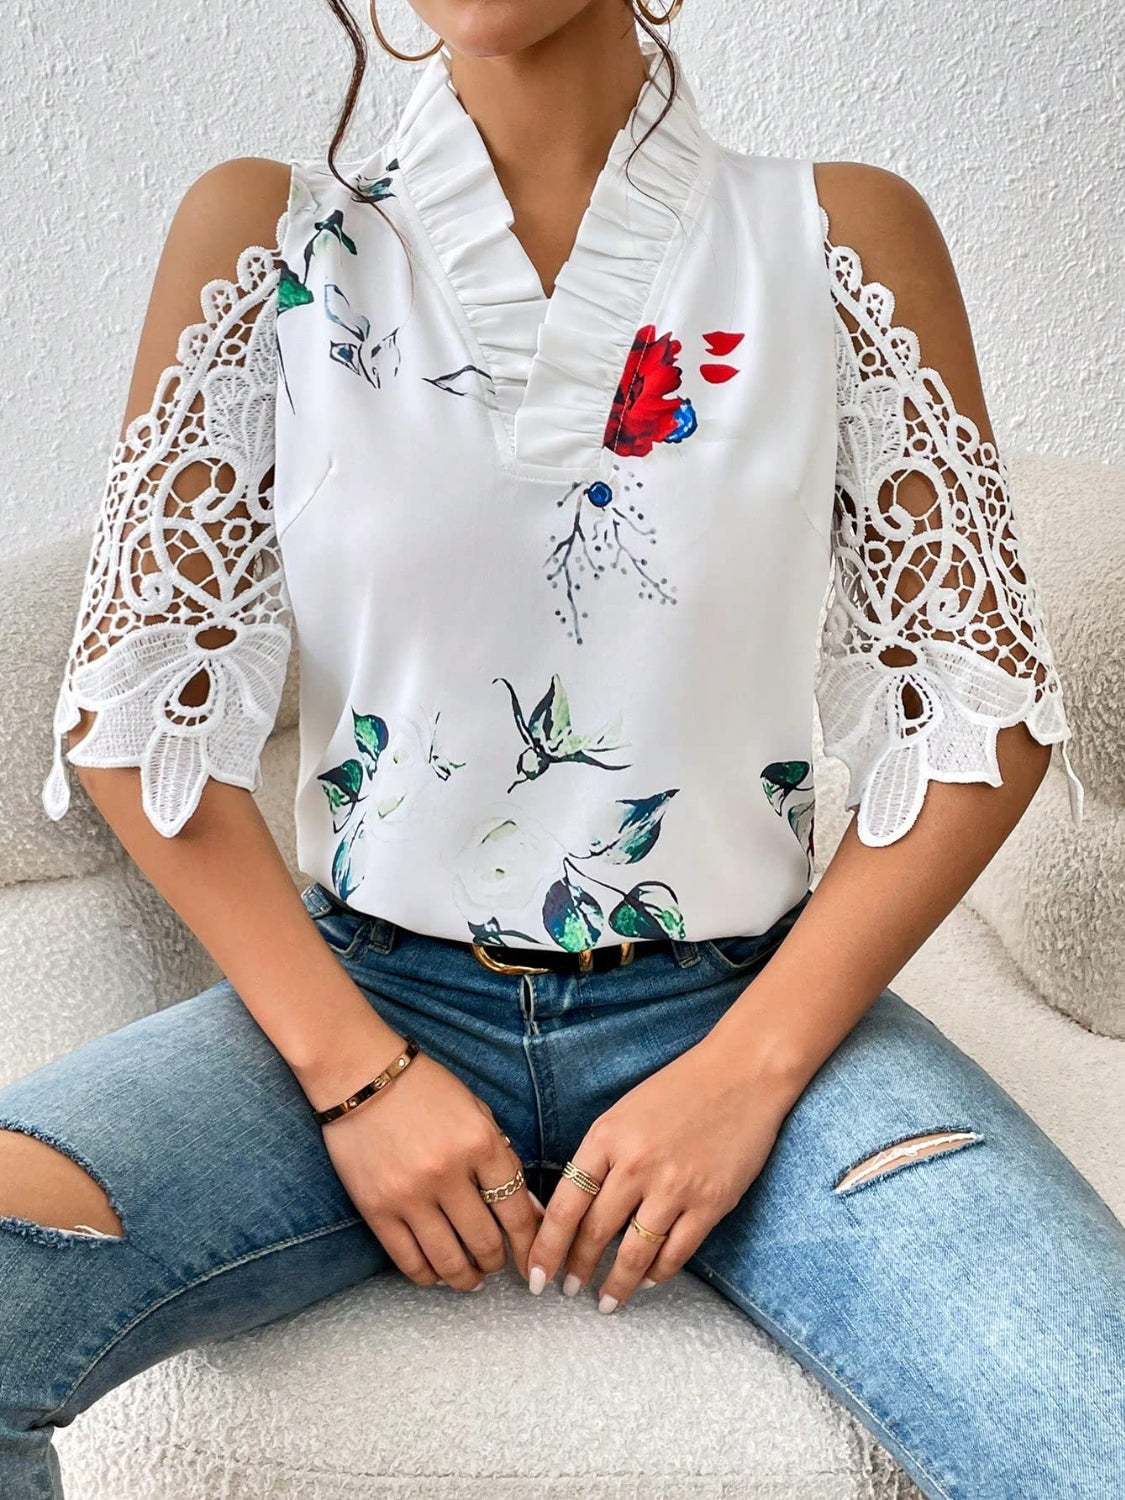 Whimsical White Lace Blouse with Floral Accents | GemThreads Boutique - GemThreads Boutique Whimsical White Lace Blouse with Floral Accents | GemThreads Boutique